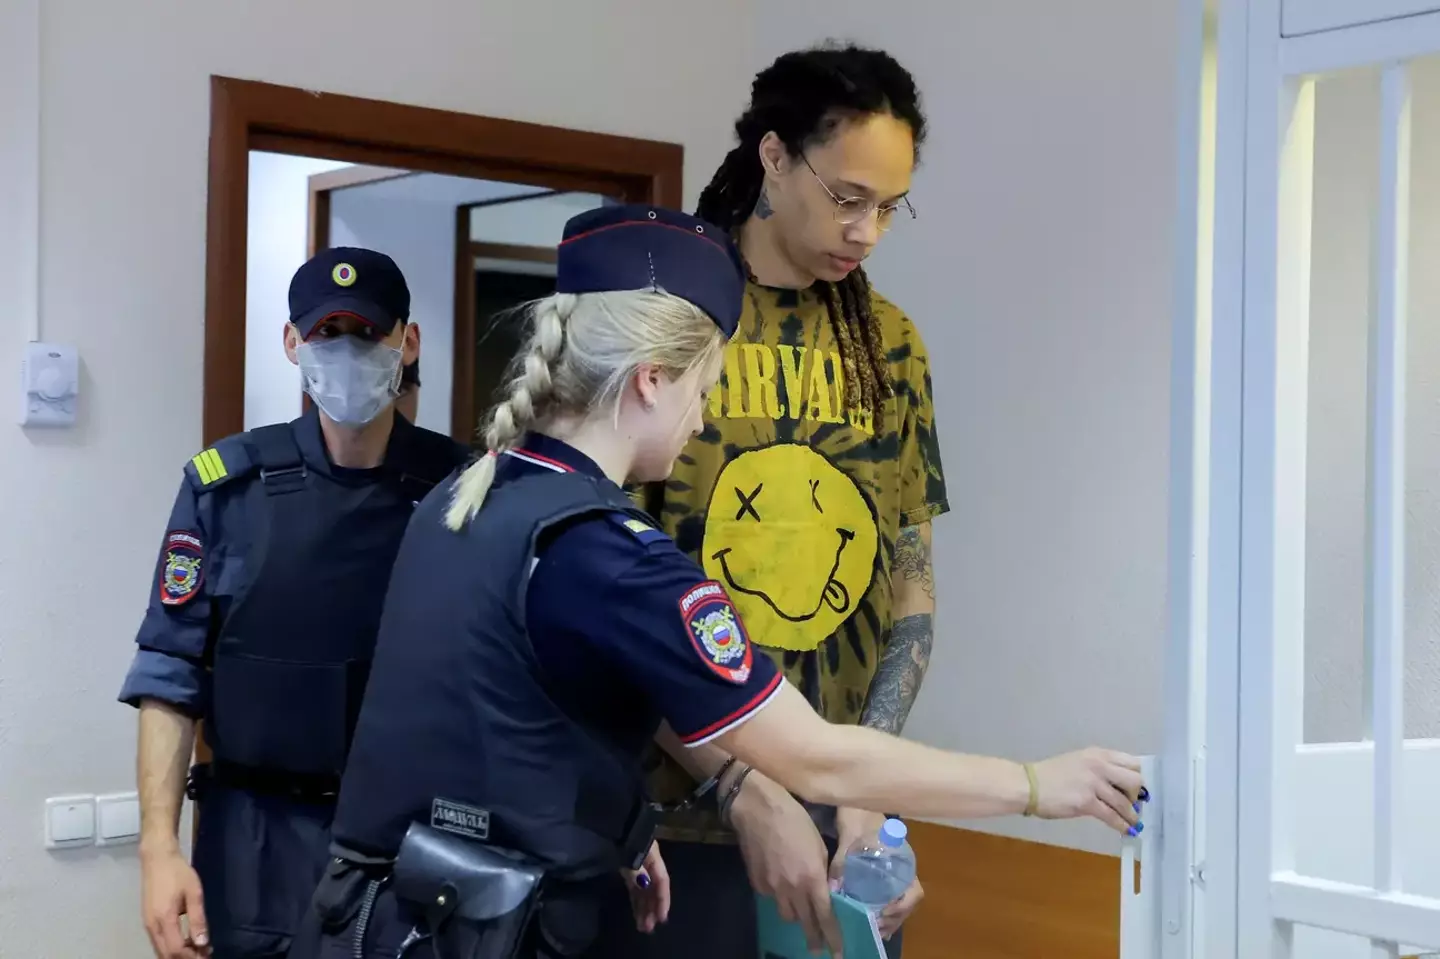 The basketballer was jailed for having 0.7 grams of THC in her possession at a Russian airport.